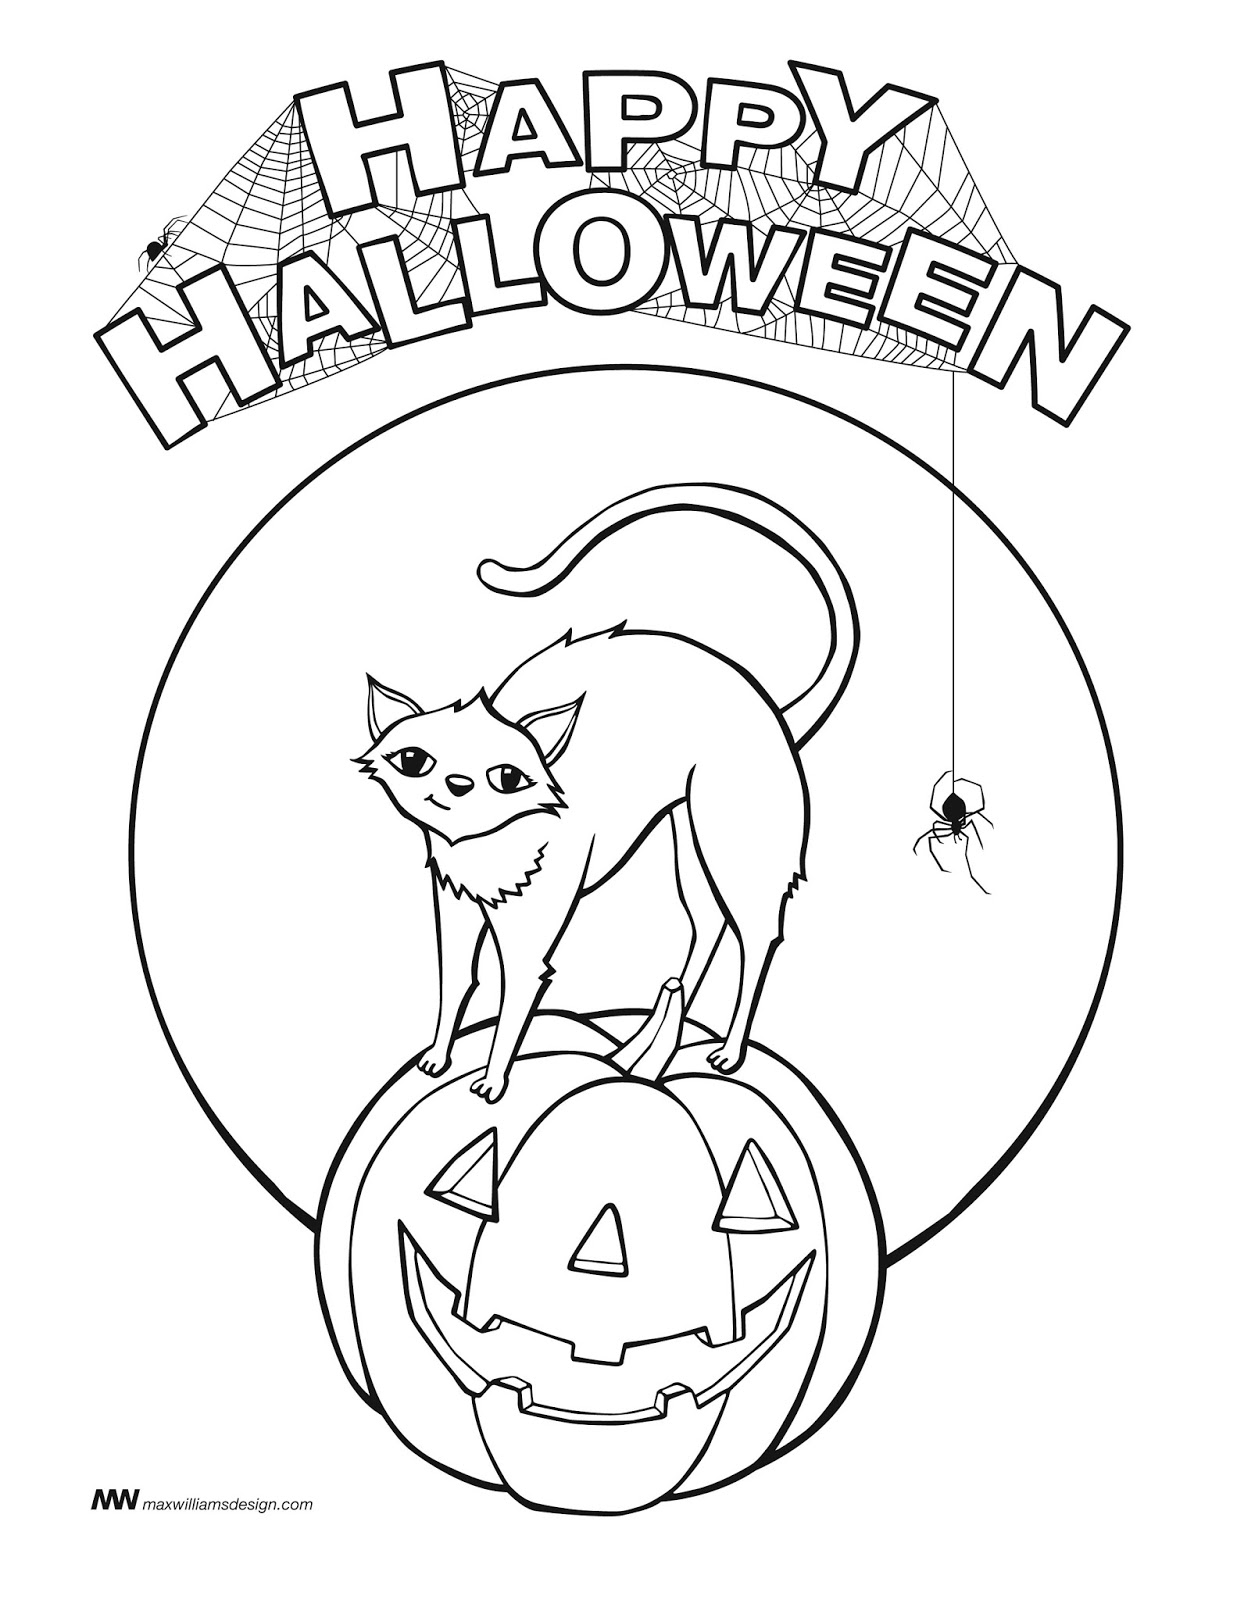 Free Halloween Coloring Pages For Preschoolers